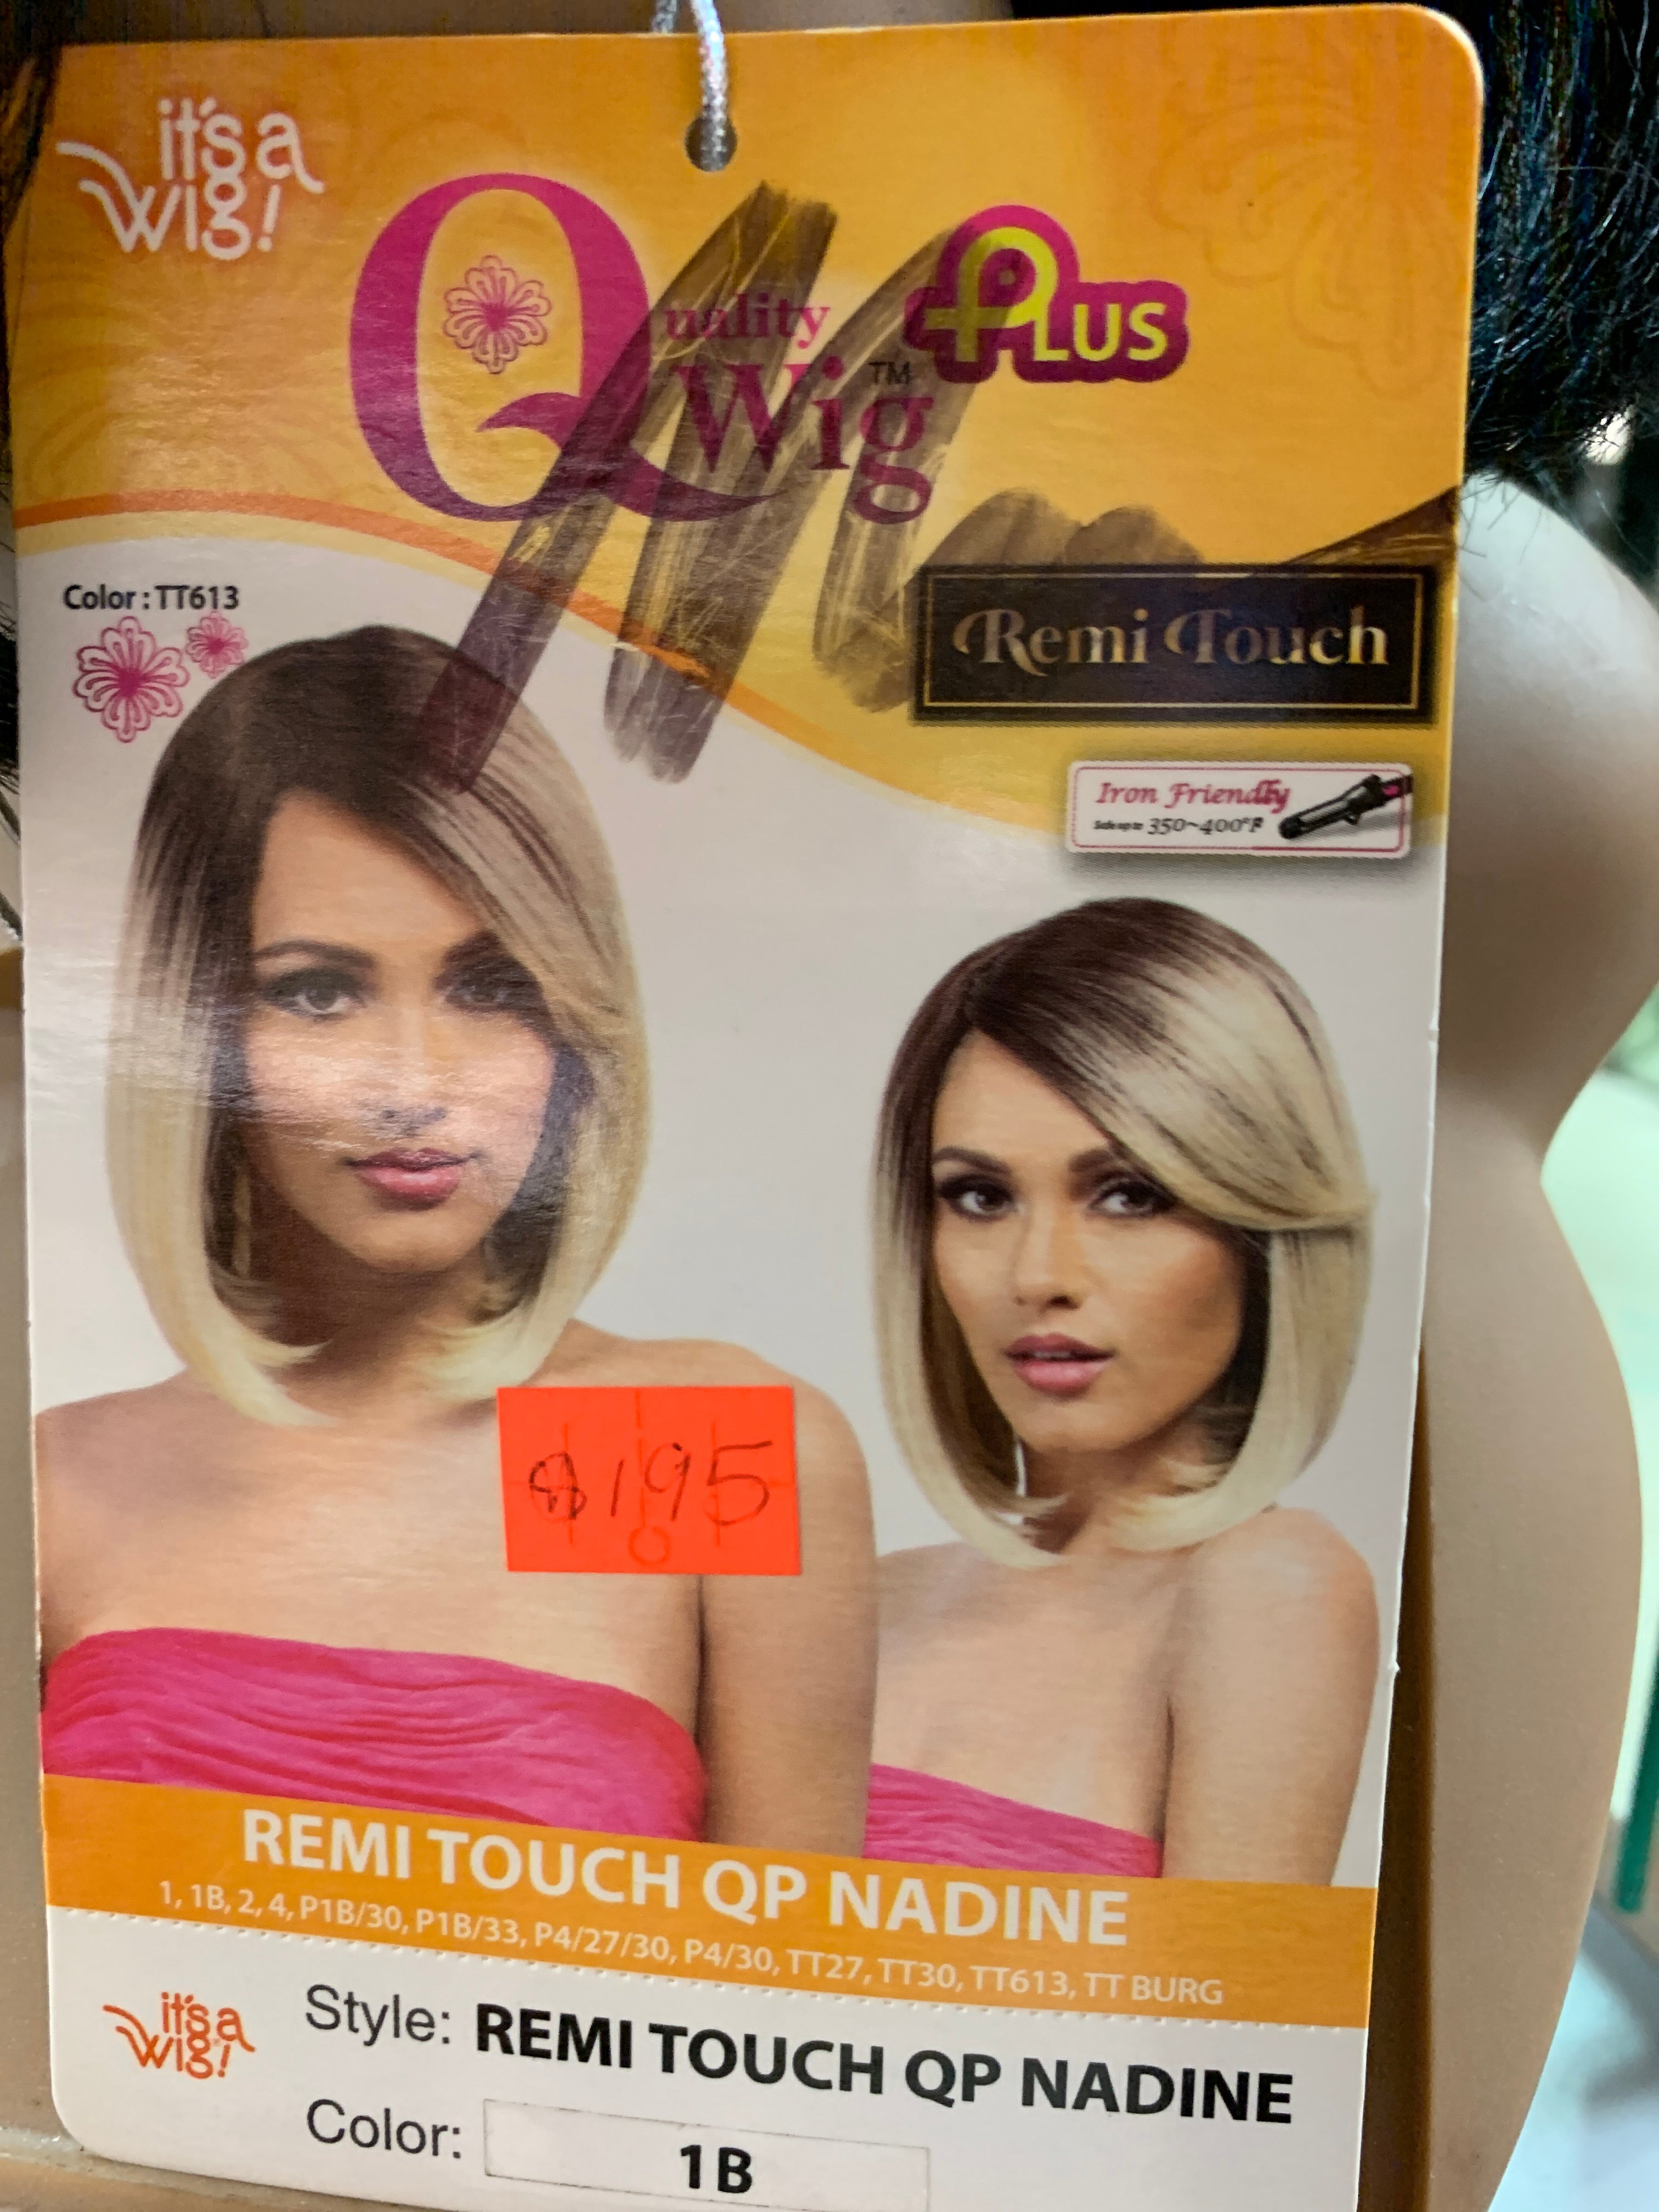 It’s a wig remi touch qp nadine